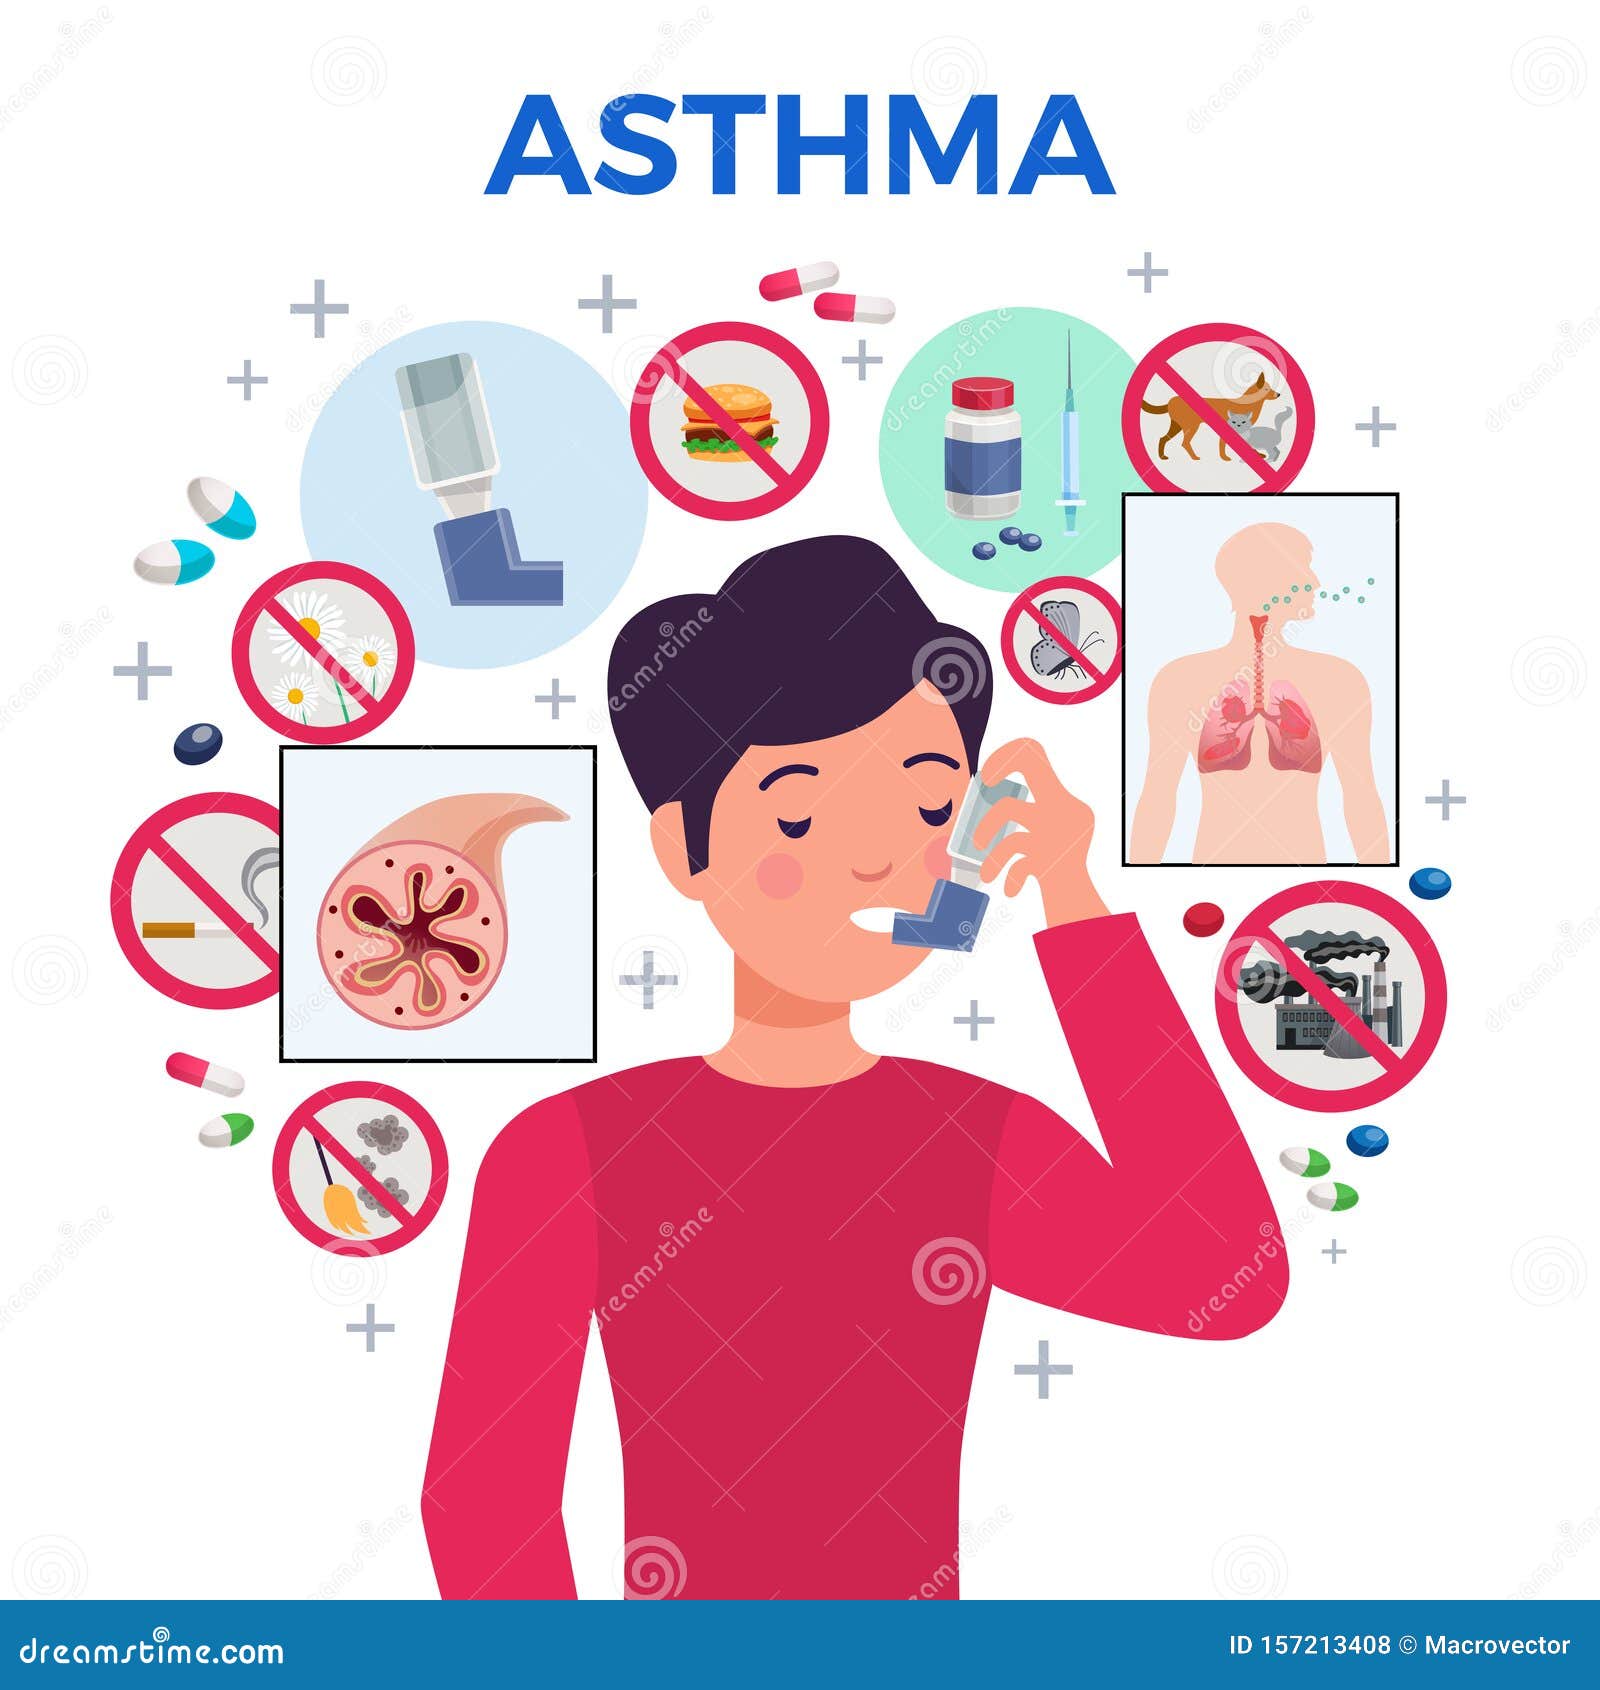 asthma flat composition